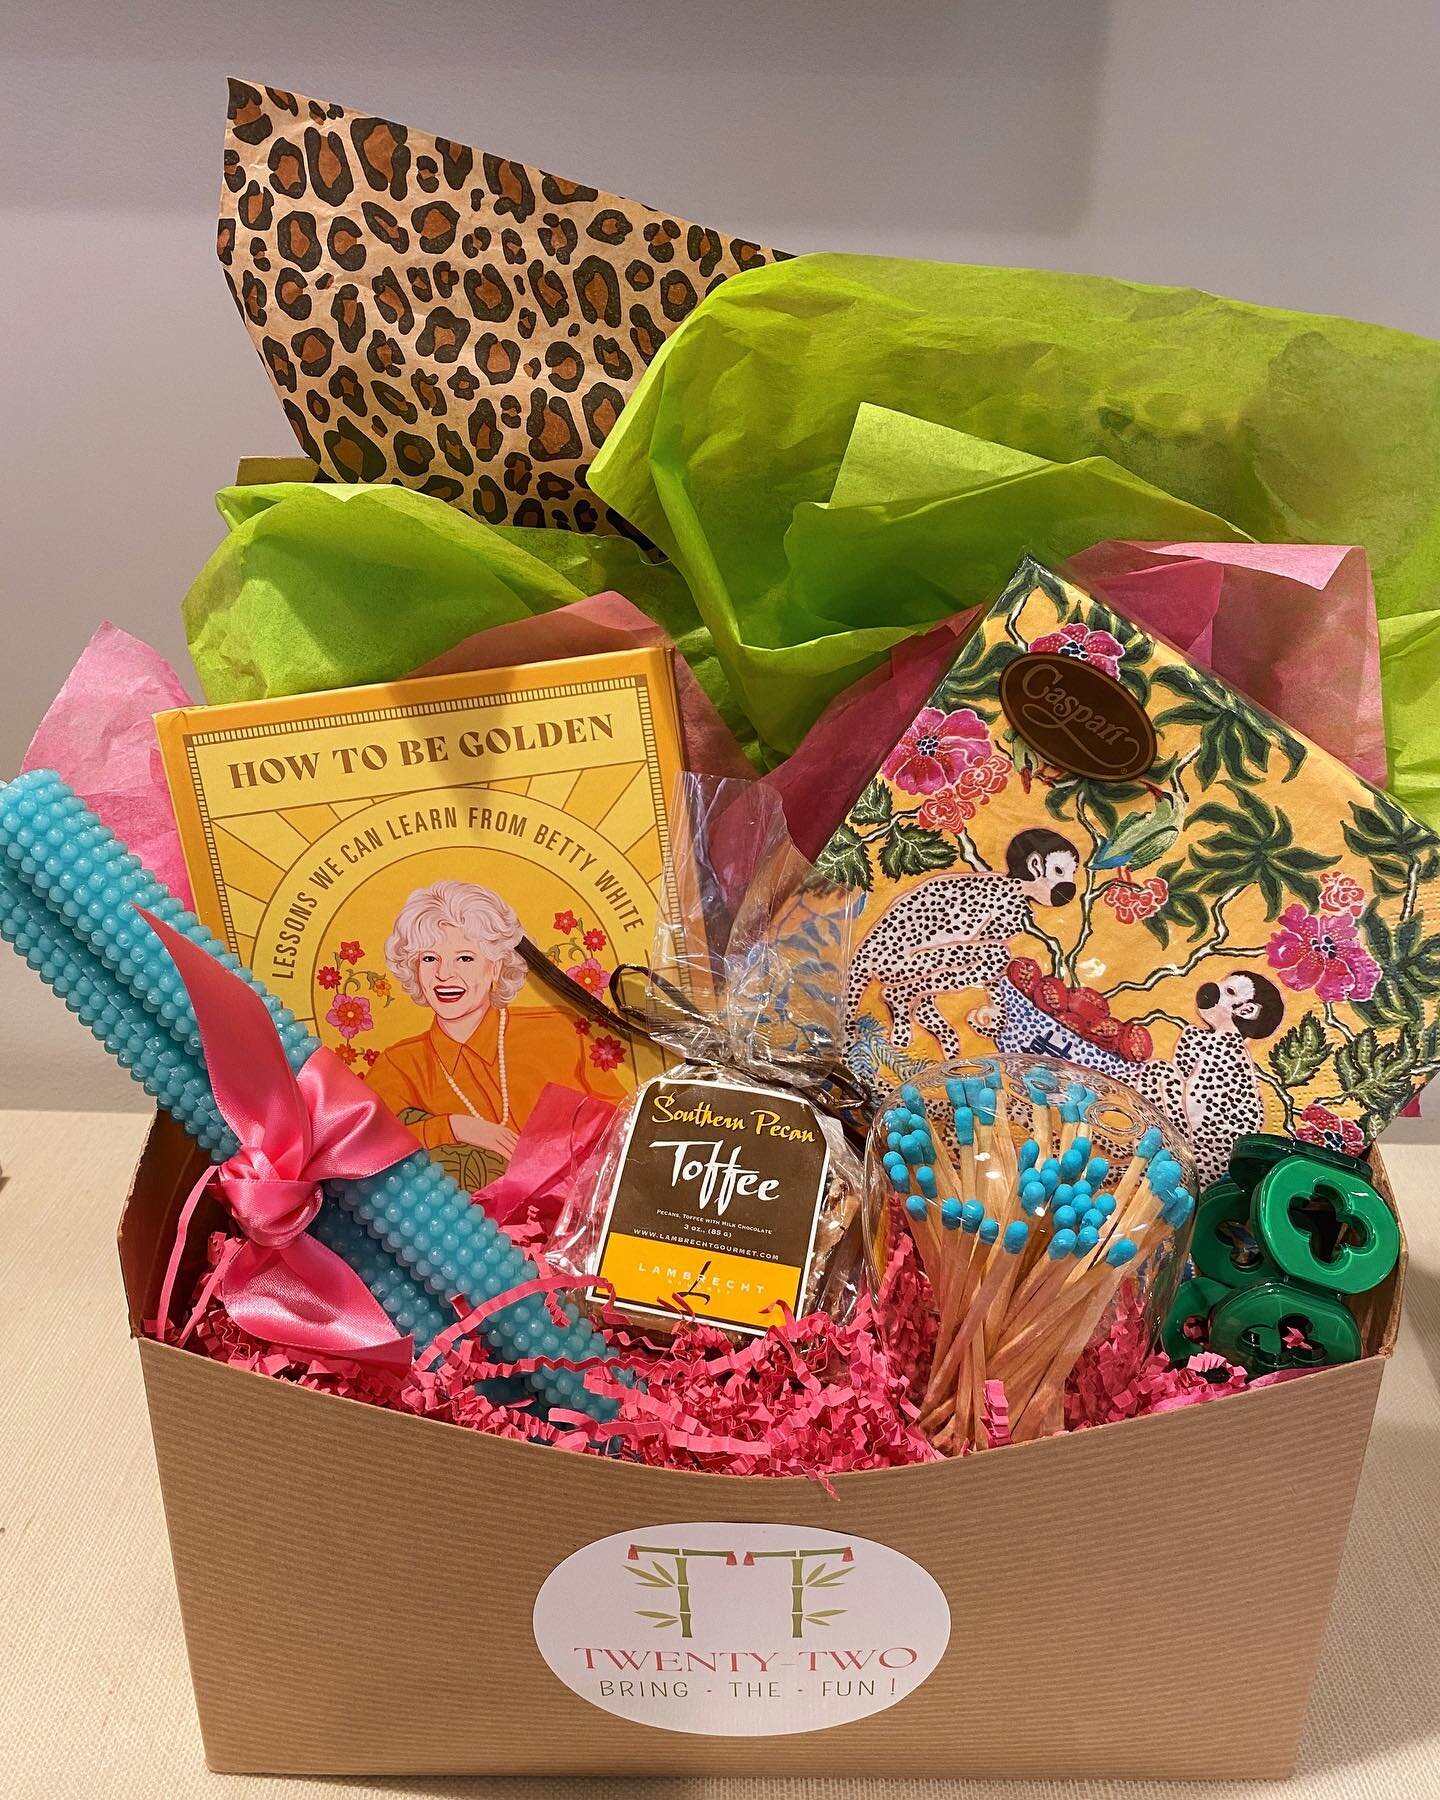 GIVEAWAY TIME!!! 💝 Fun little surprise for y&rsquo;all as we celebrate @winewomenandshoeschatt 🤩

This BOX OF SUNSHINE is sure to bring a smile to your face! Bright, bold, spunky, and FUN all over! 🦩

To enter:
1. Follow us- @shopattwentytwo 
2. L